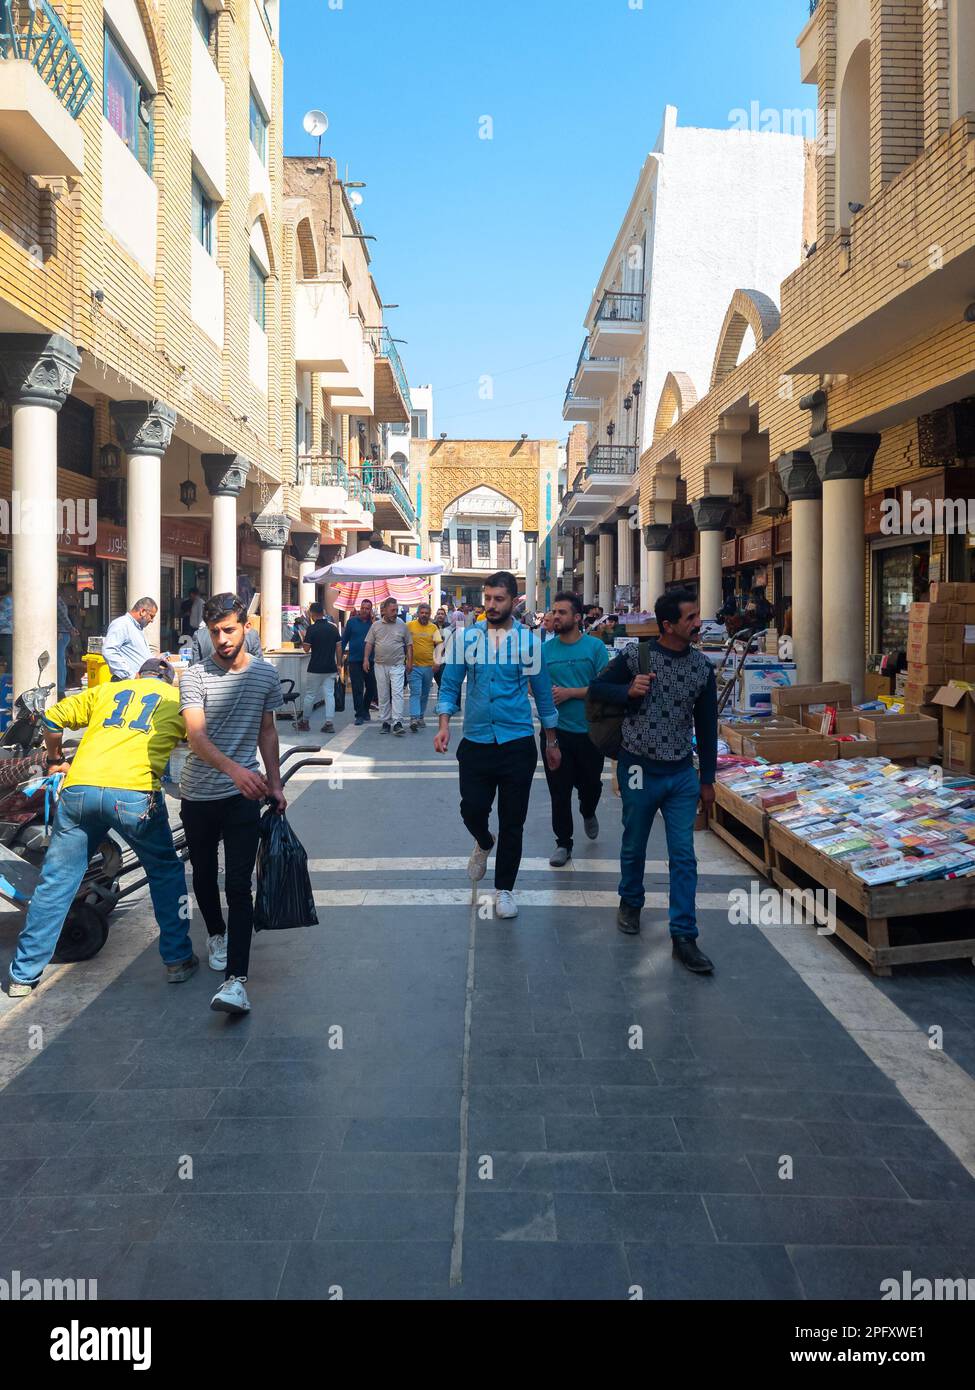 Baghdad, Iraq - Feb 27, 2023: Portrait View of Mutanabbi Street, which is known for Curbside Book Selling. It is the Historic Center of Bookselling. Stock Photo